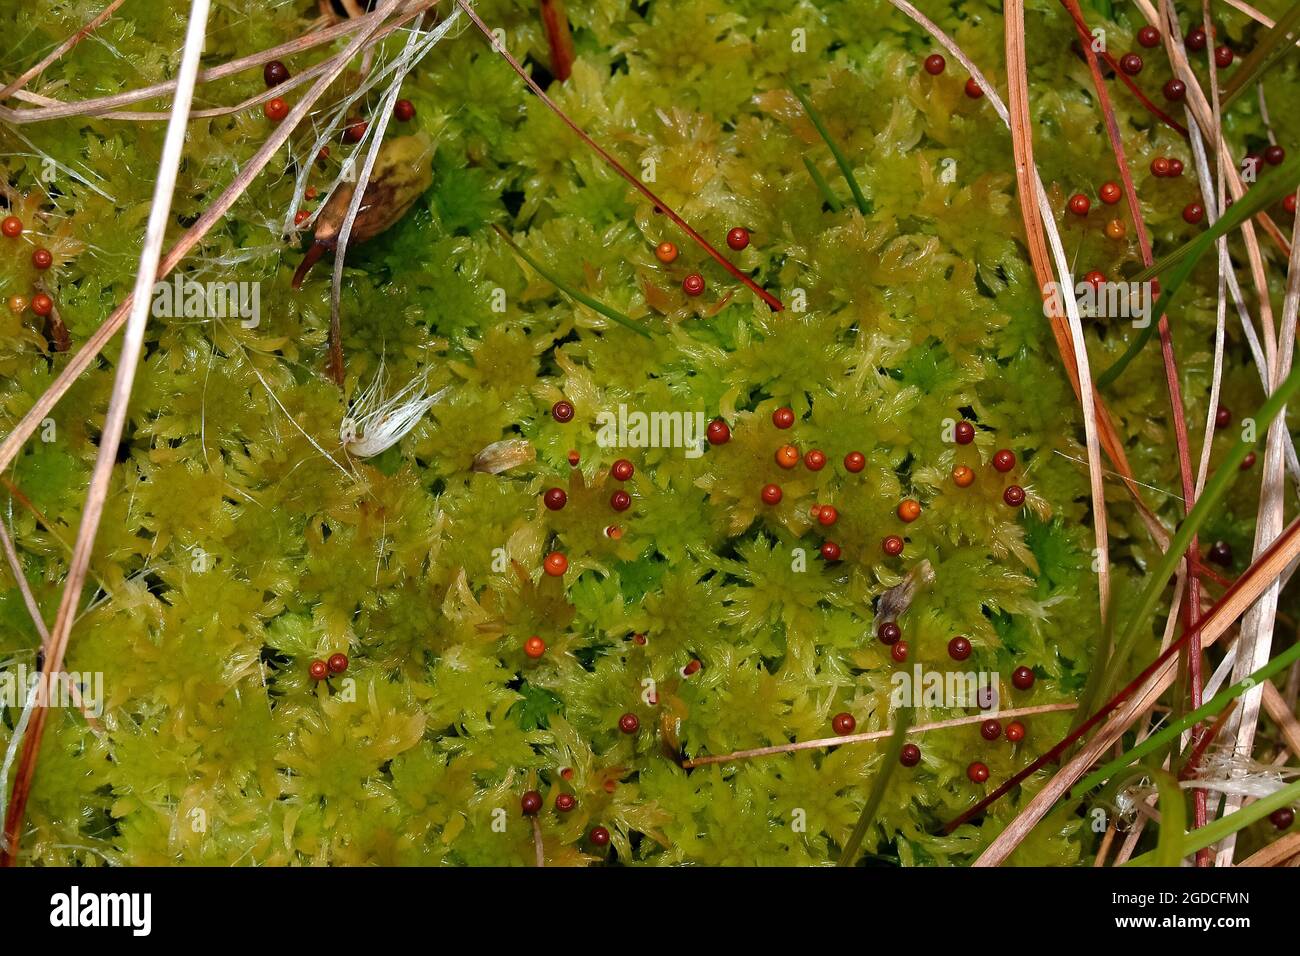 peat moss, Torfmoose, Bleichmoose, Sphagnum, tőzegmoha, Europe, It is a highly protected species in Hungary. Stock Photo